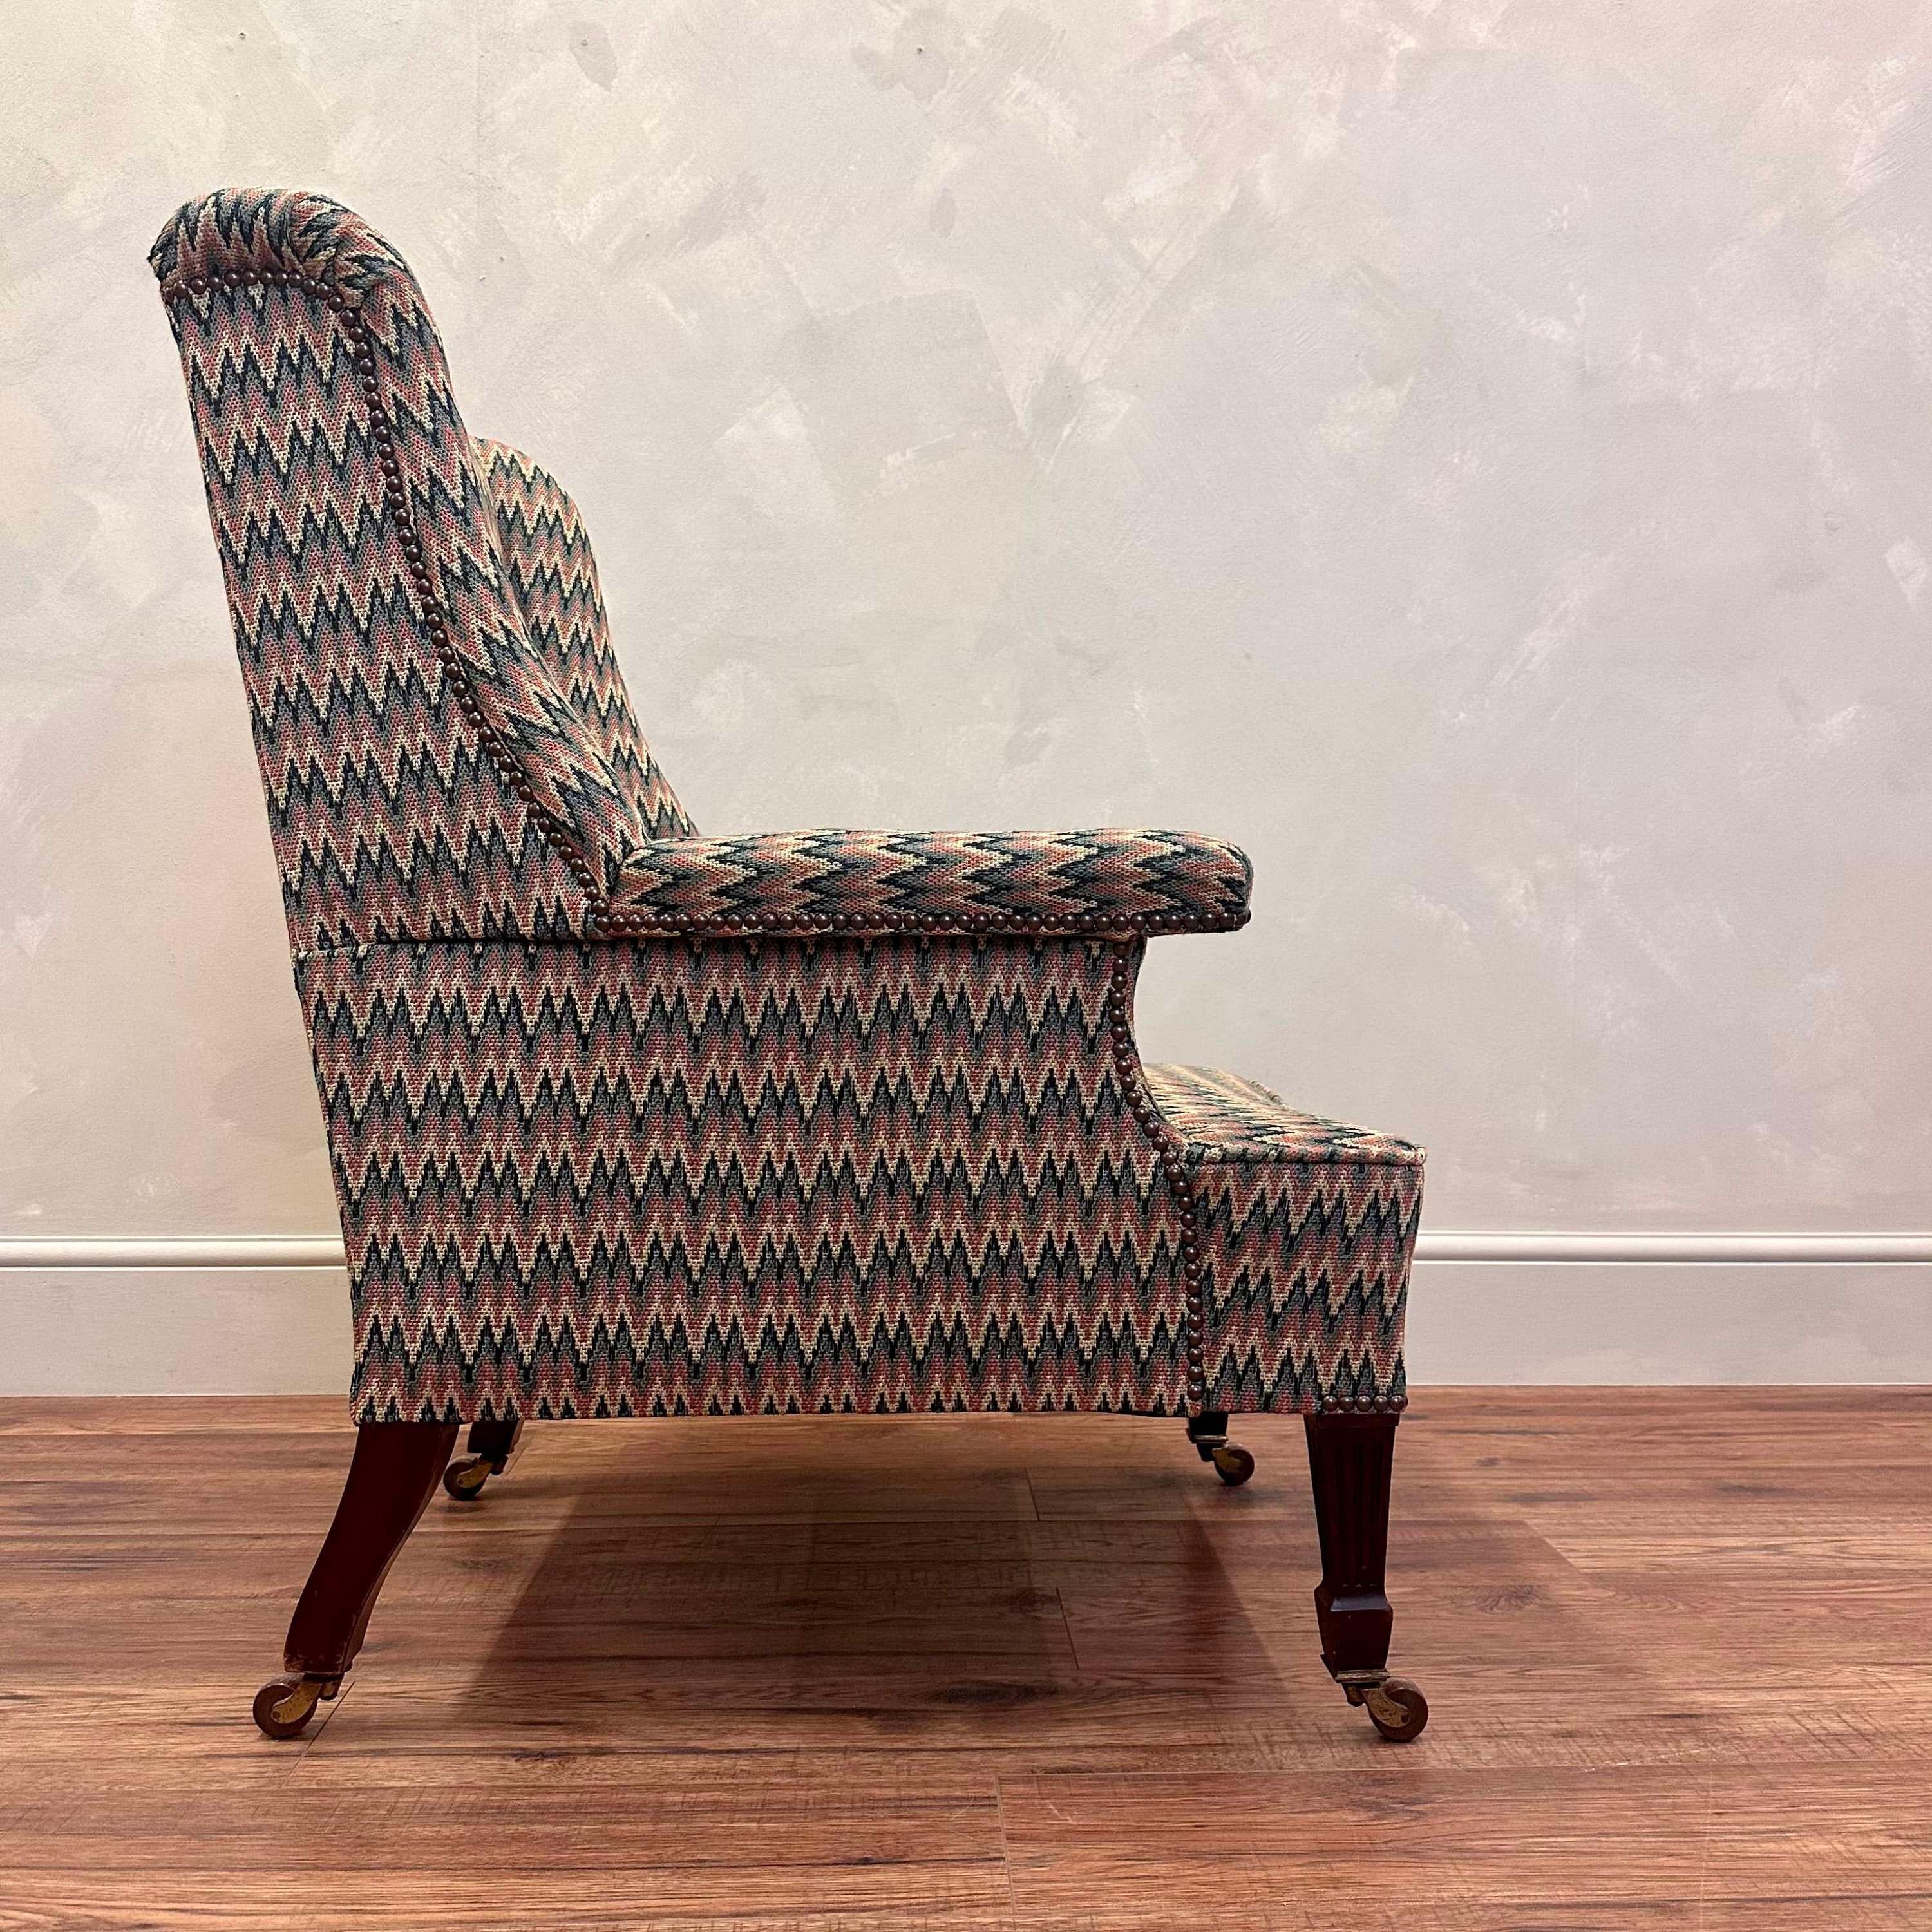 19th Century English Upholstered Armchair Flamstitch Fabric  For Sale 2